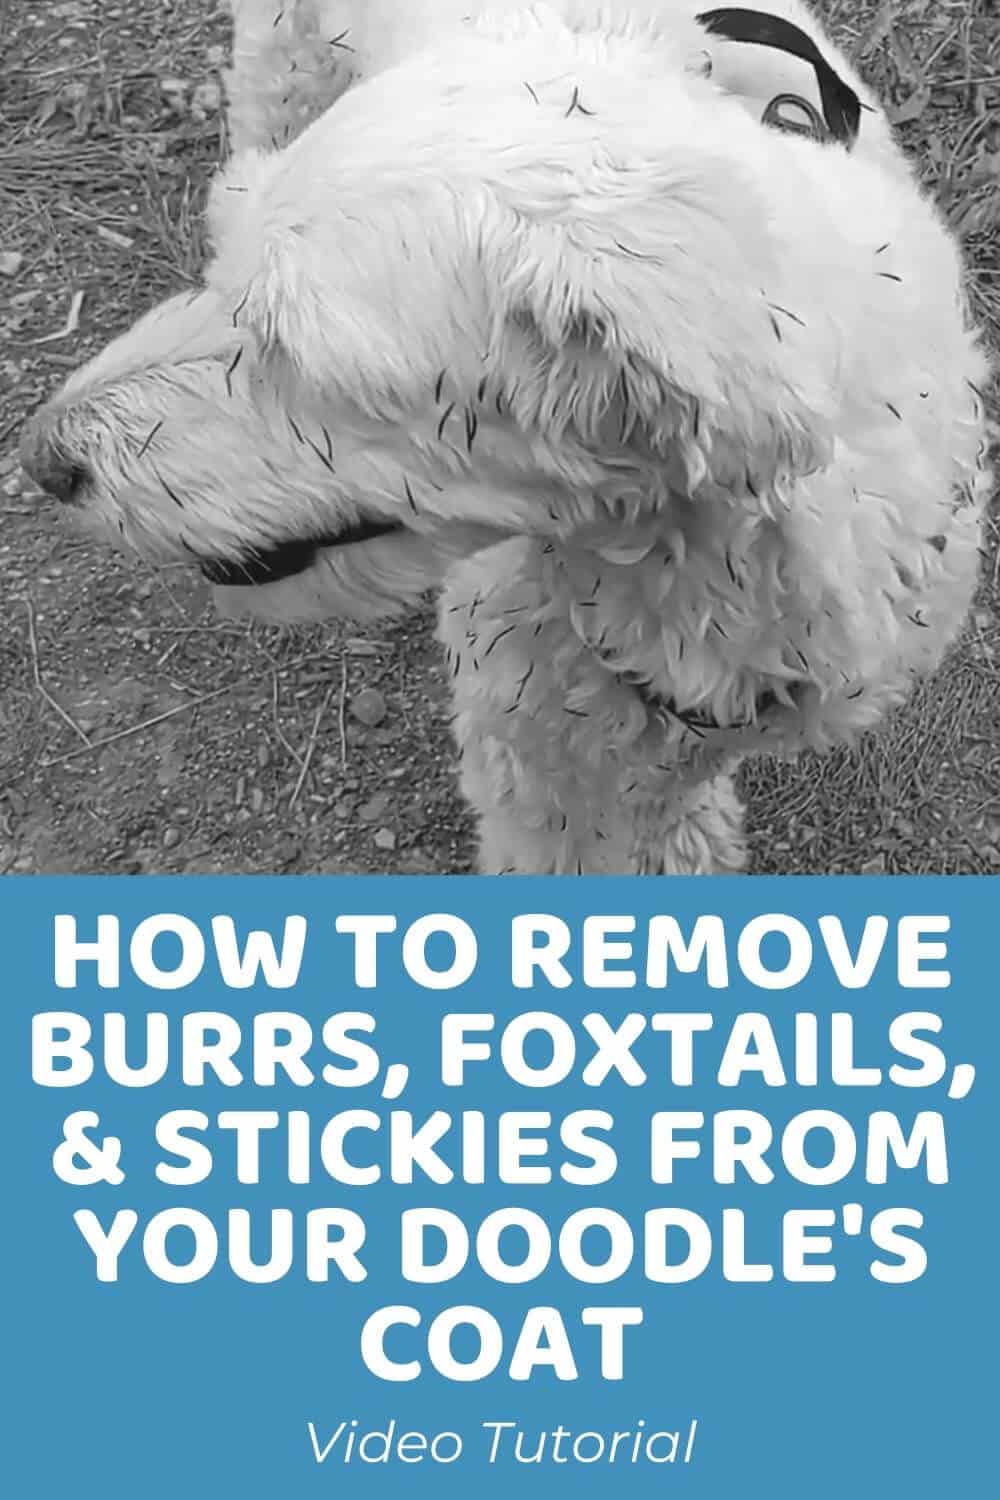 How to Remove Burrs, Foxtails, and Stickies From Your Doodle's Coat - Doodle Doods